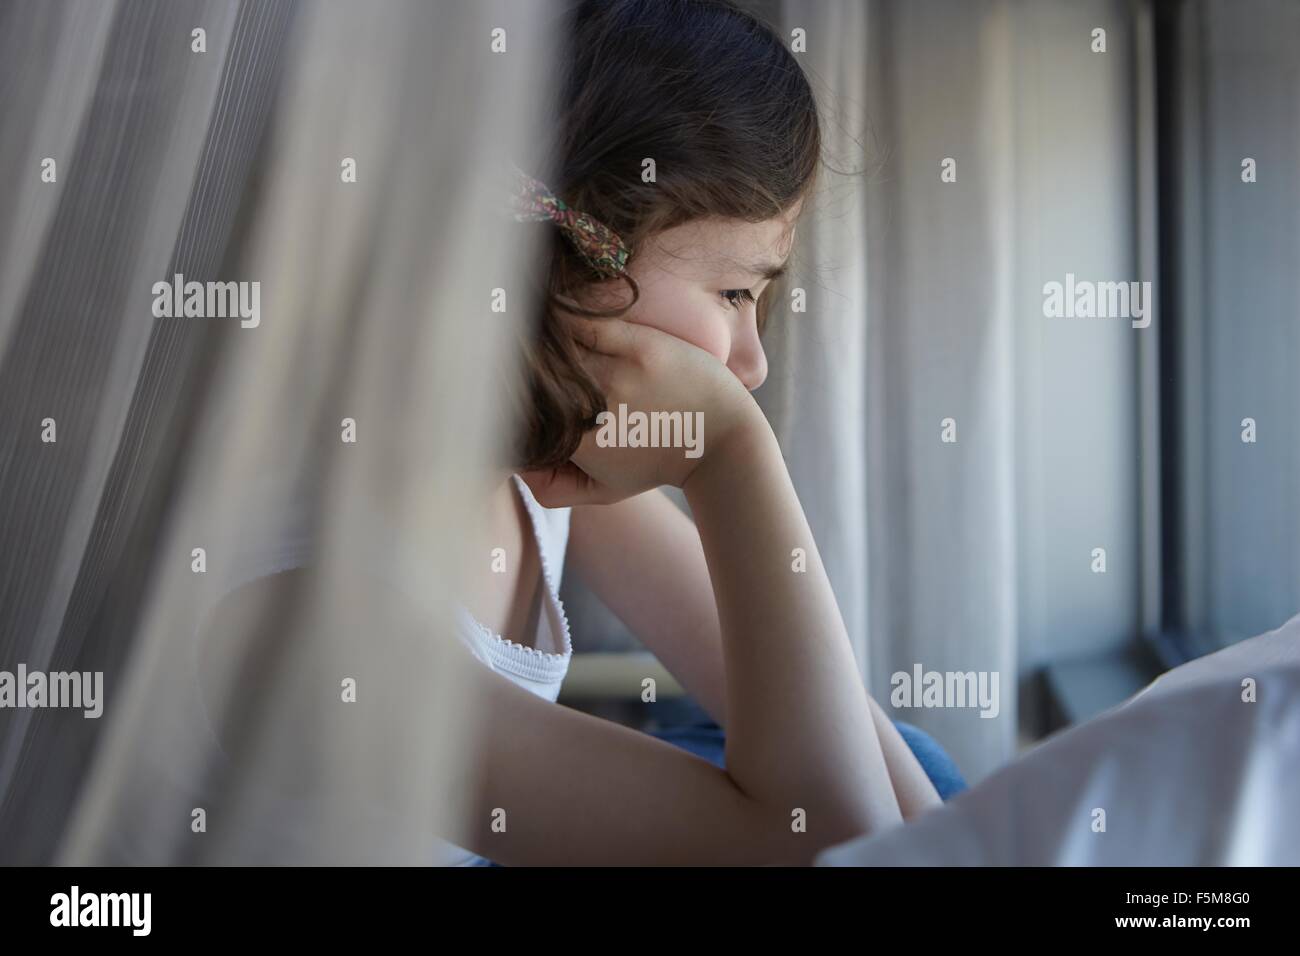 Sullen girl reclining on bed resting on elbow Stock Photo